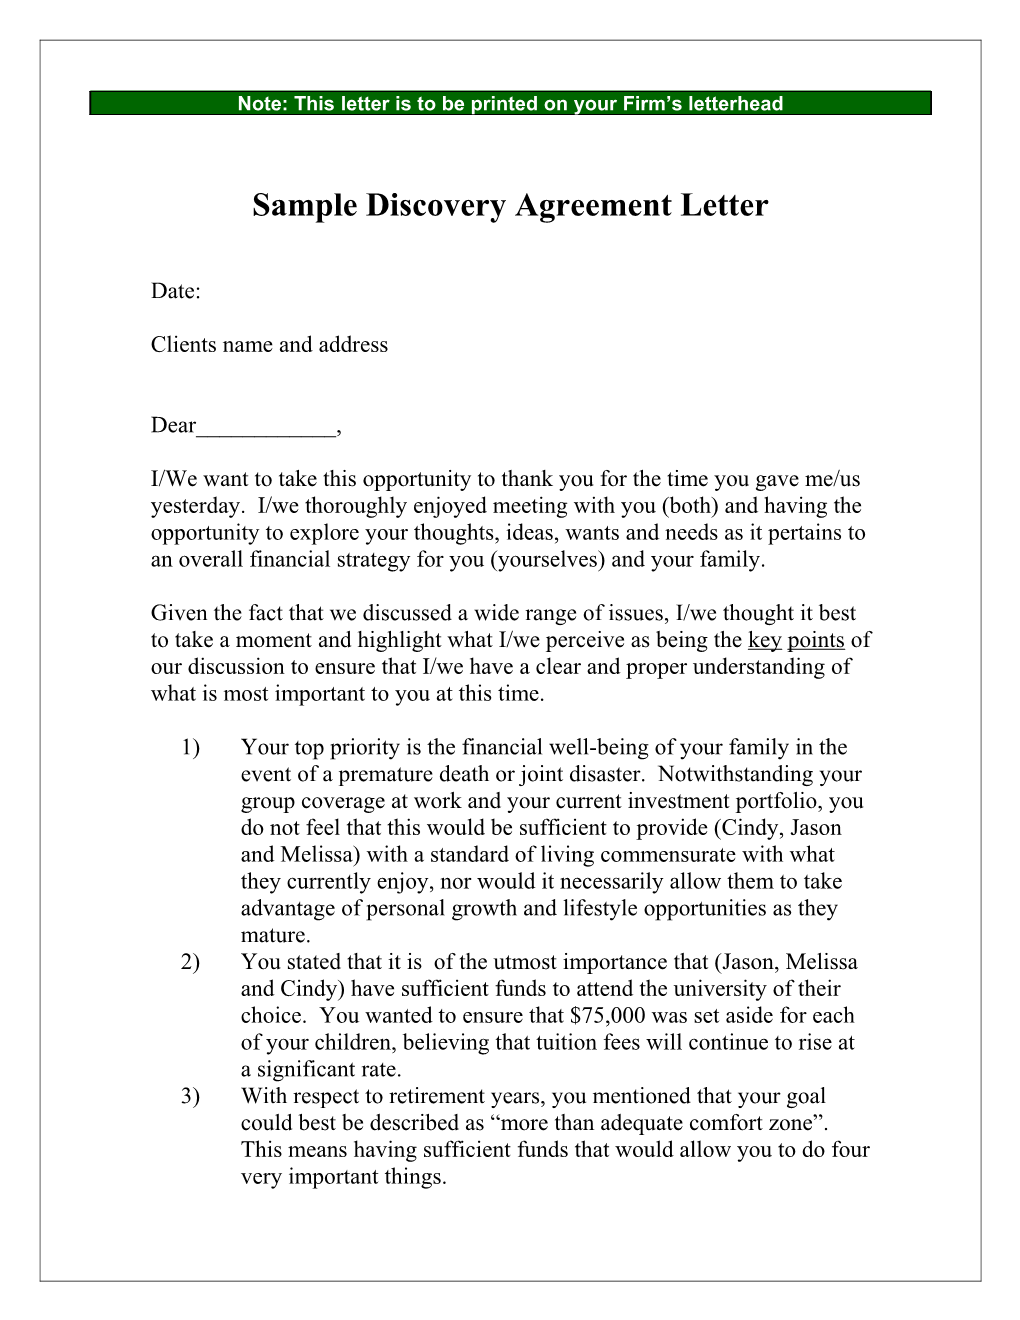 Sample Discovery Agreement Letter